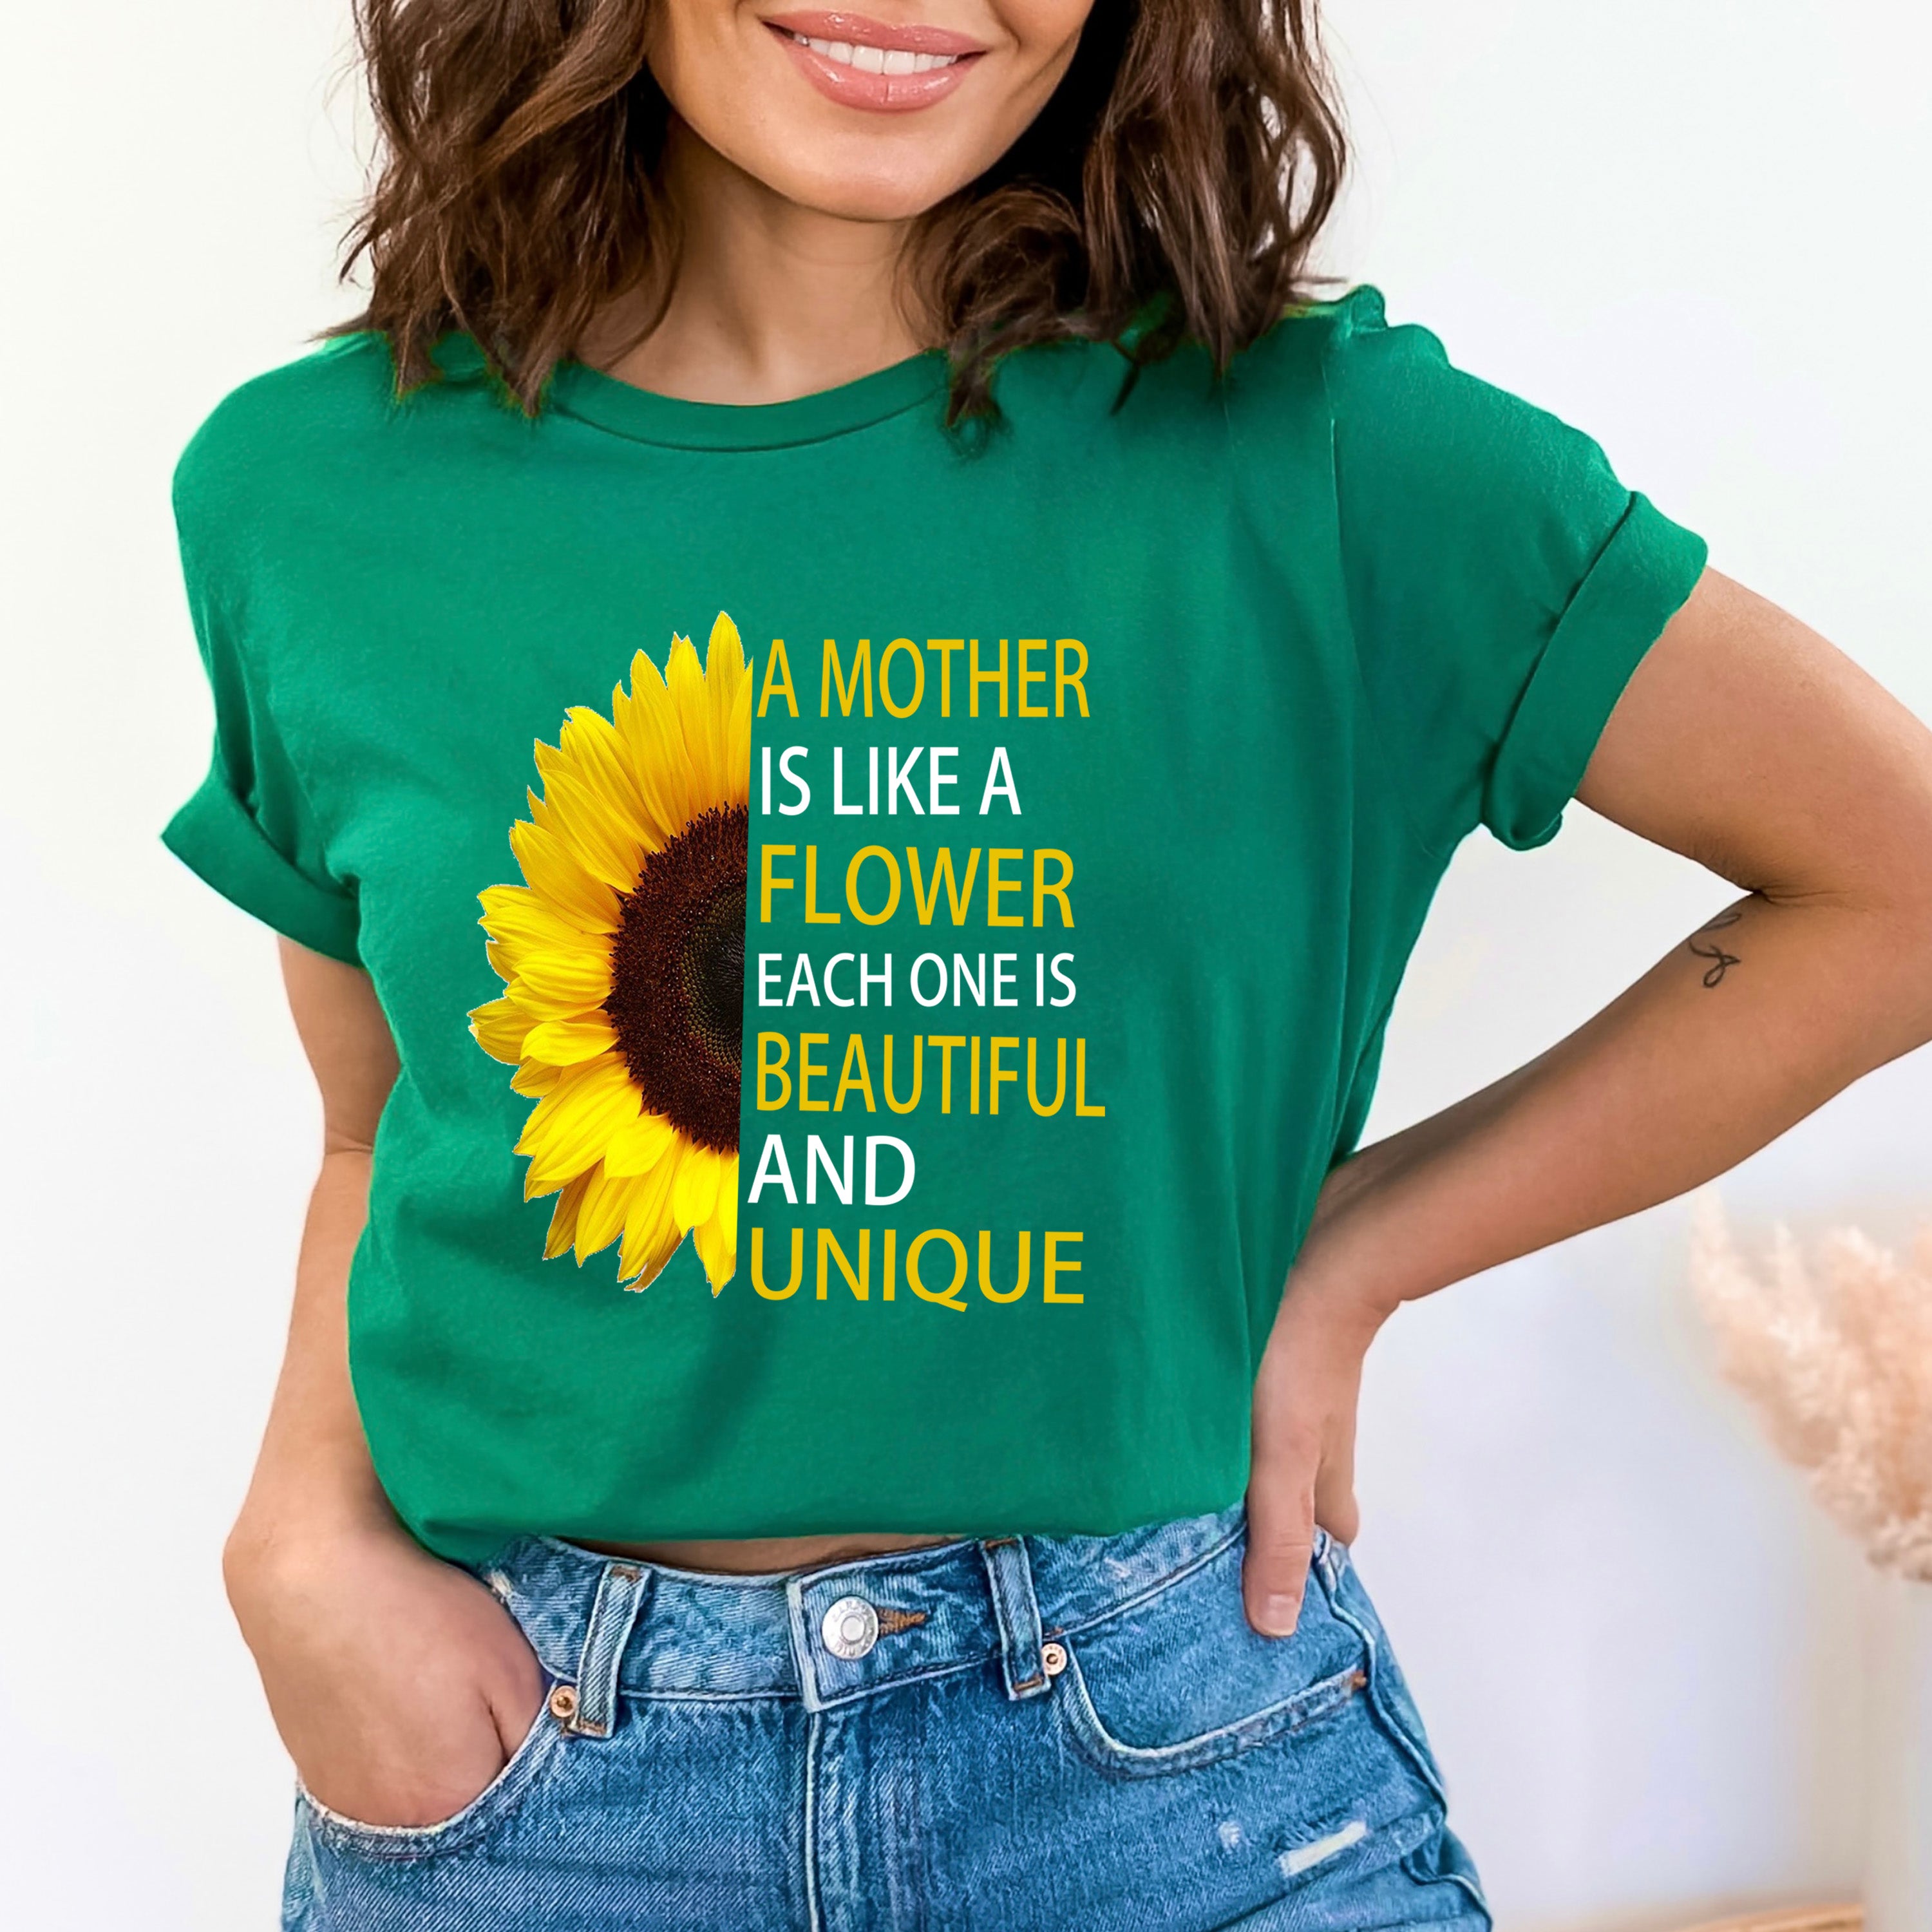 A Mother Is Like A Flower - Bella canvas